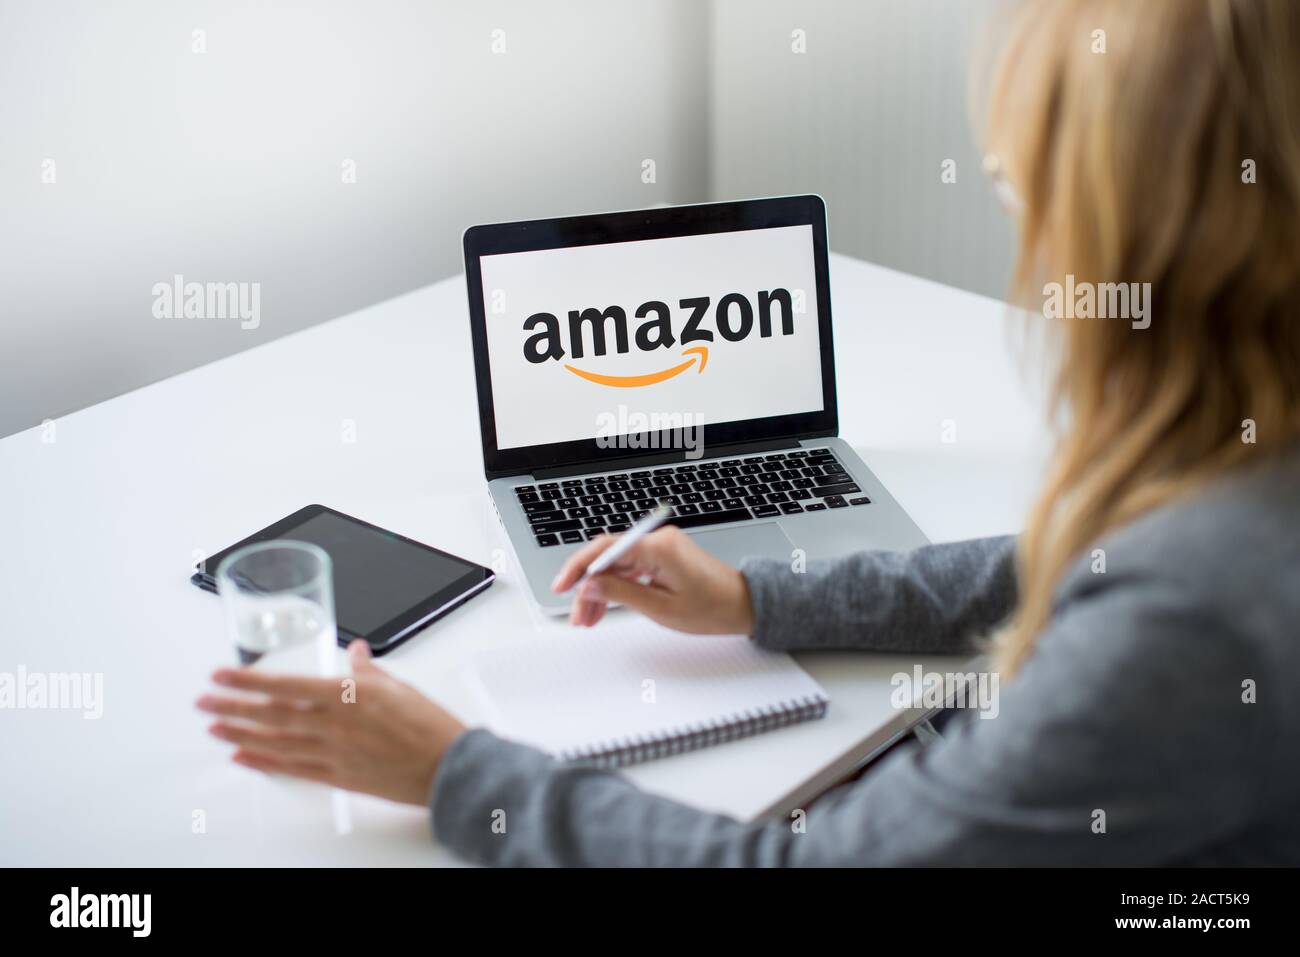 Amazon Computer Person High Resolution Stock Photography and Images - Alamy